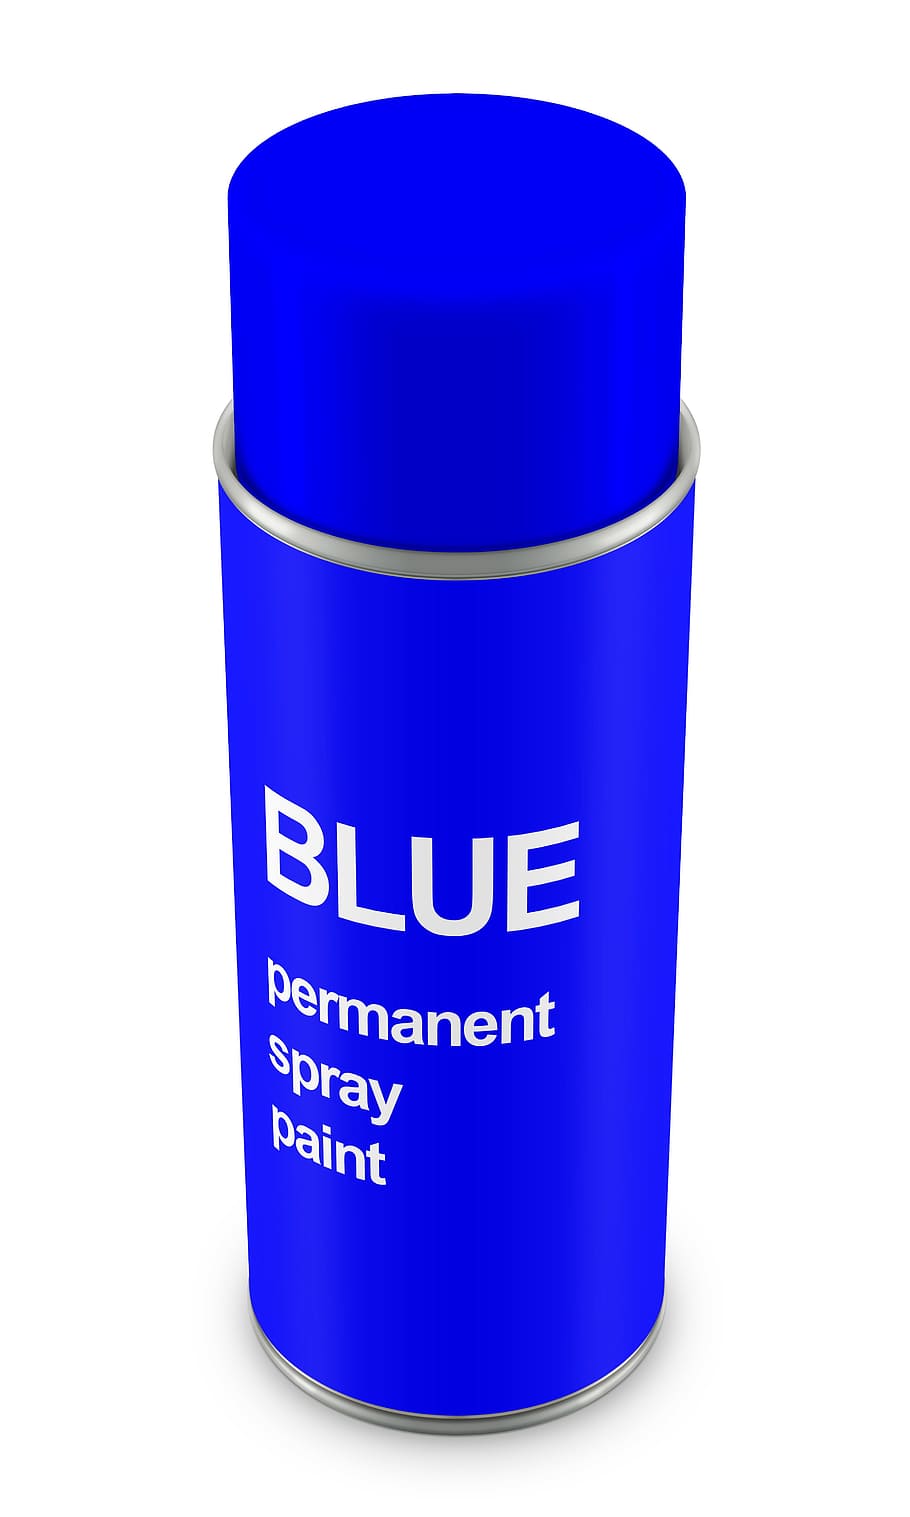 spray can, paint, tin, aerosol, bottle, container, canister, artistic, blue, white background